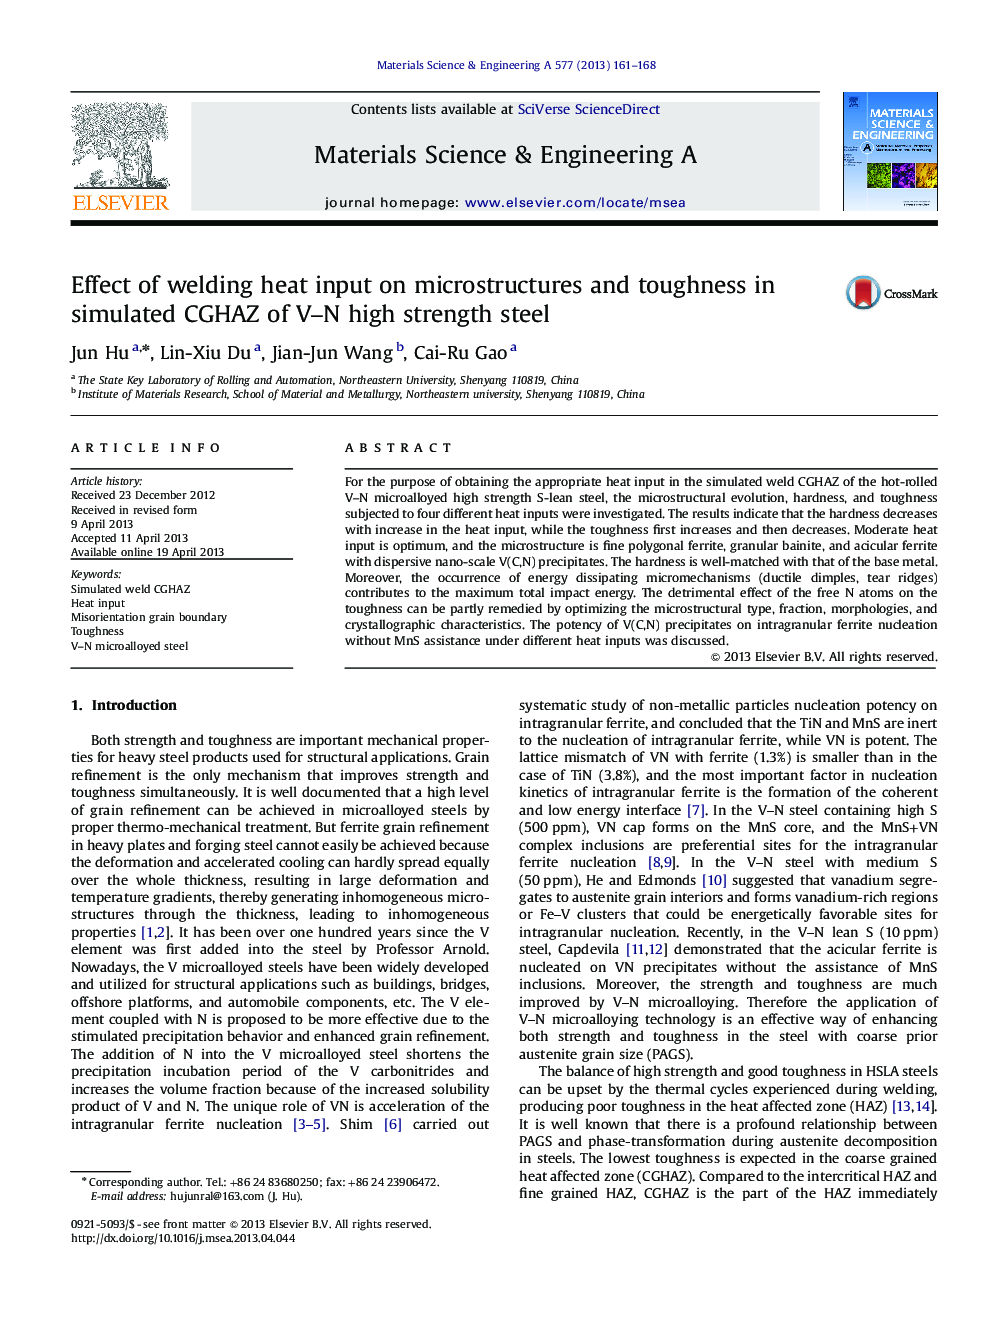 Effect of welding heat input on microstructures and toughness in simulated CGHAZ of V-N high strength steel